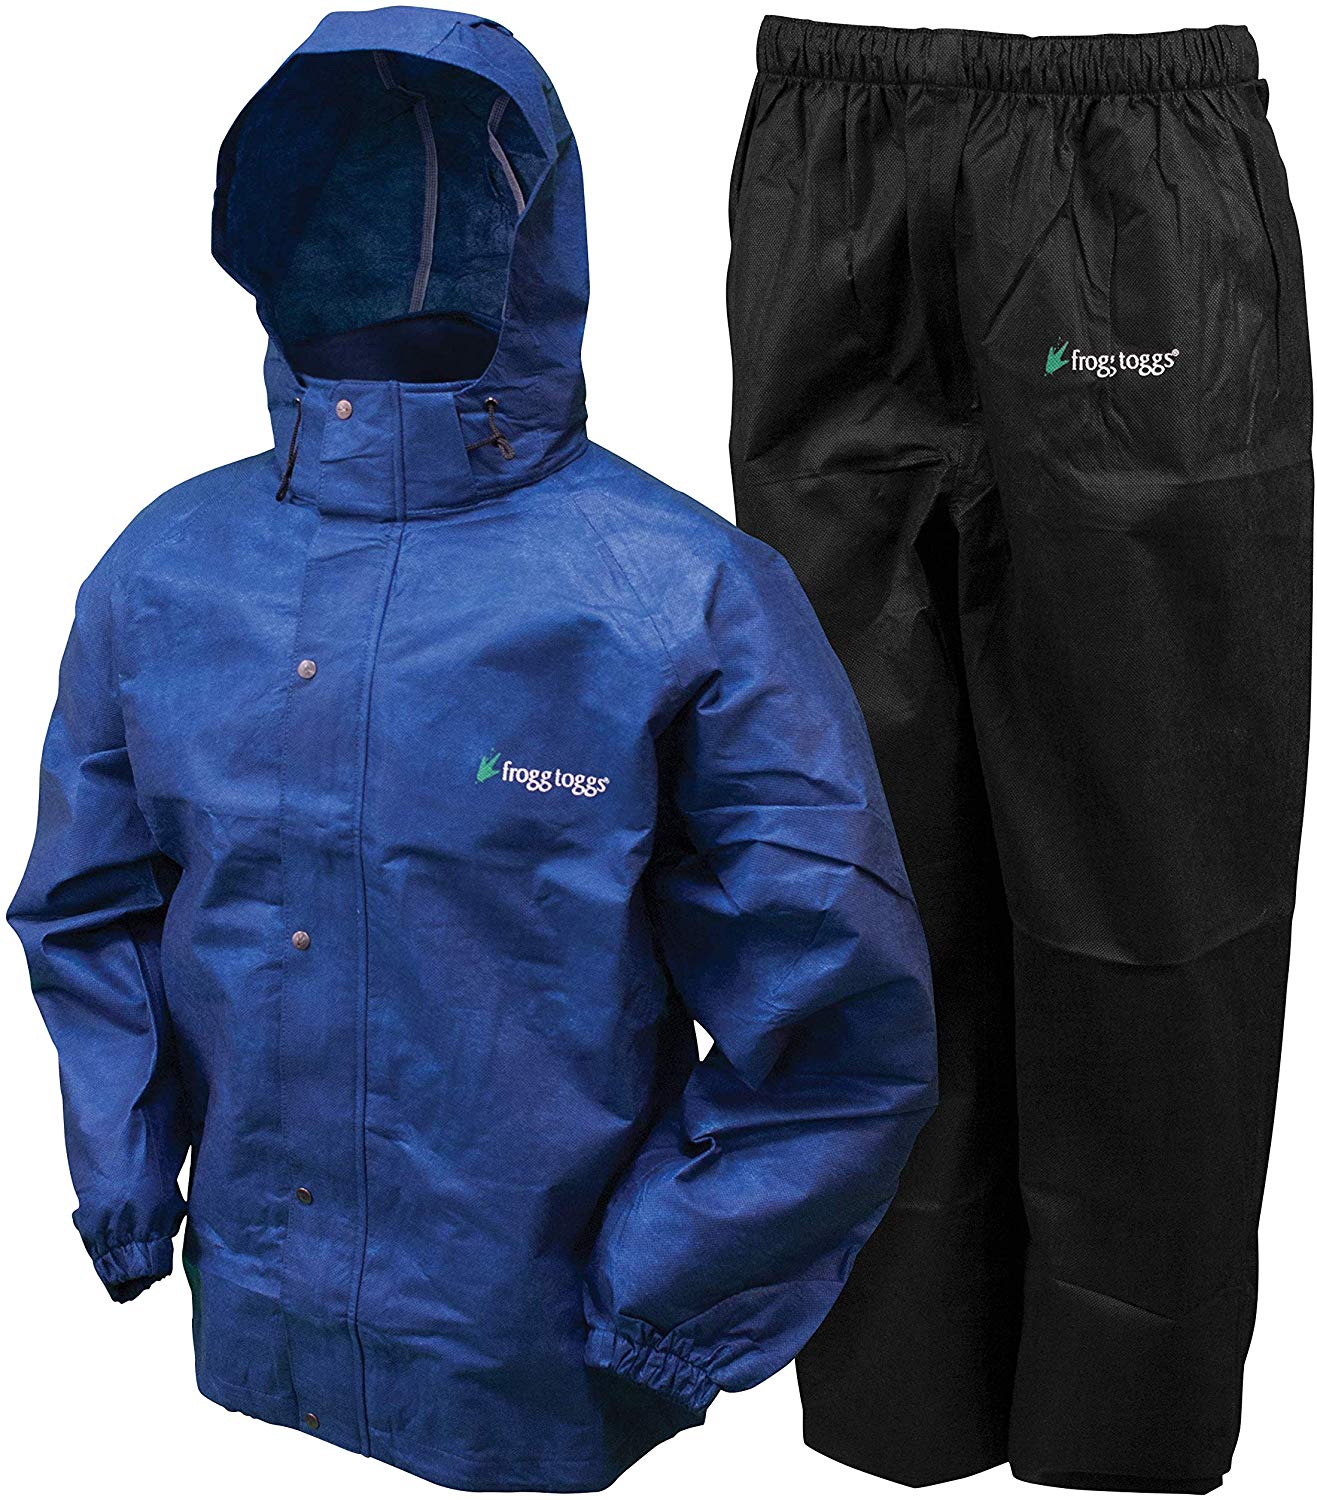 Frogg Toggs All Sport Rain Suit, Royal Blue Jacket/Black Pants, Size Small